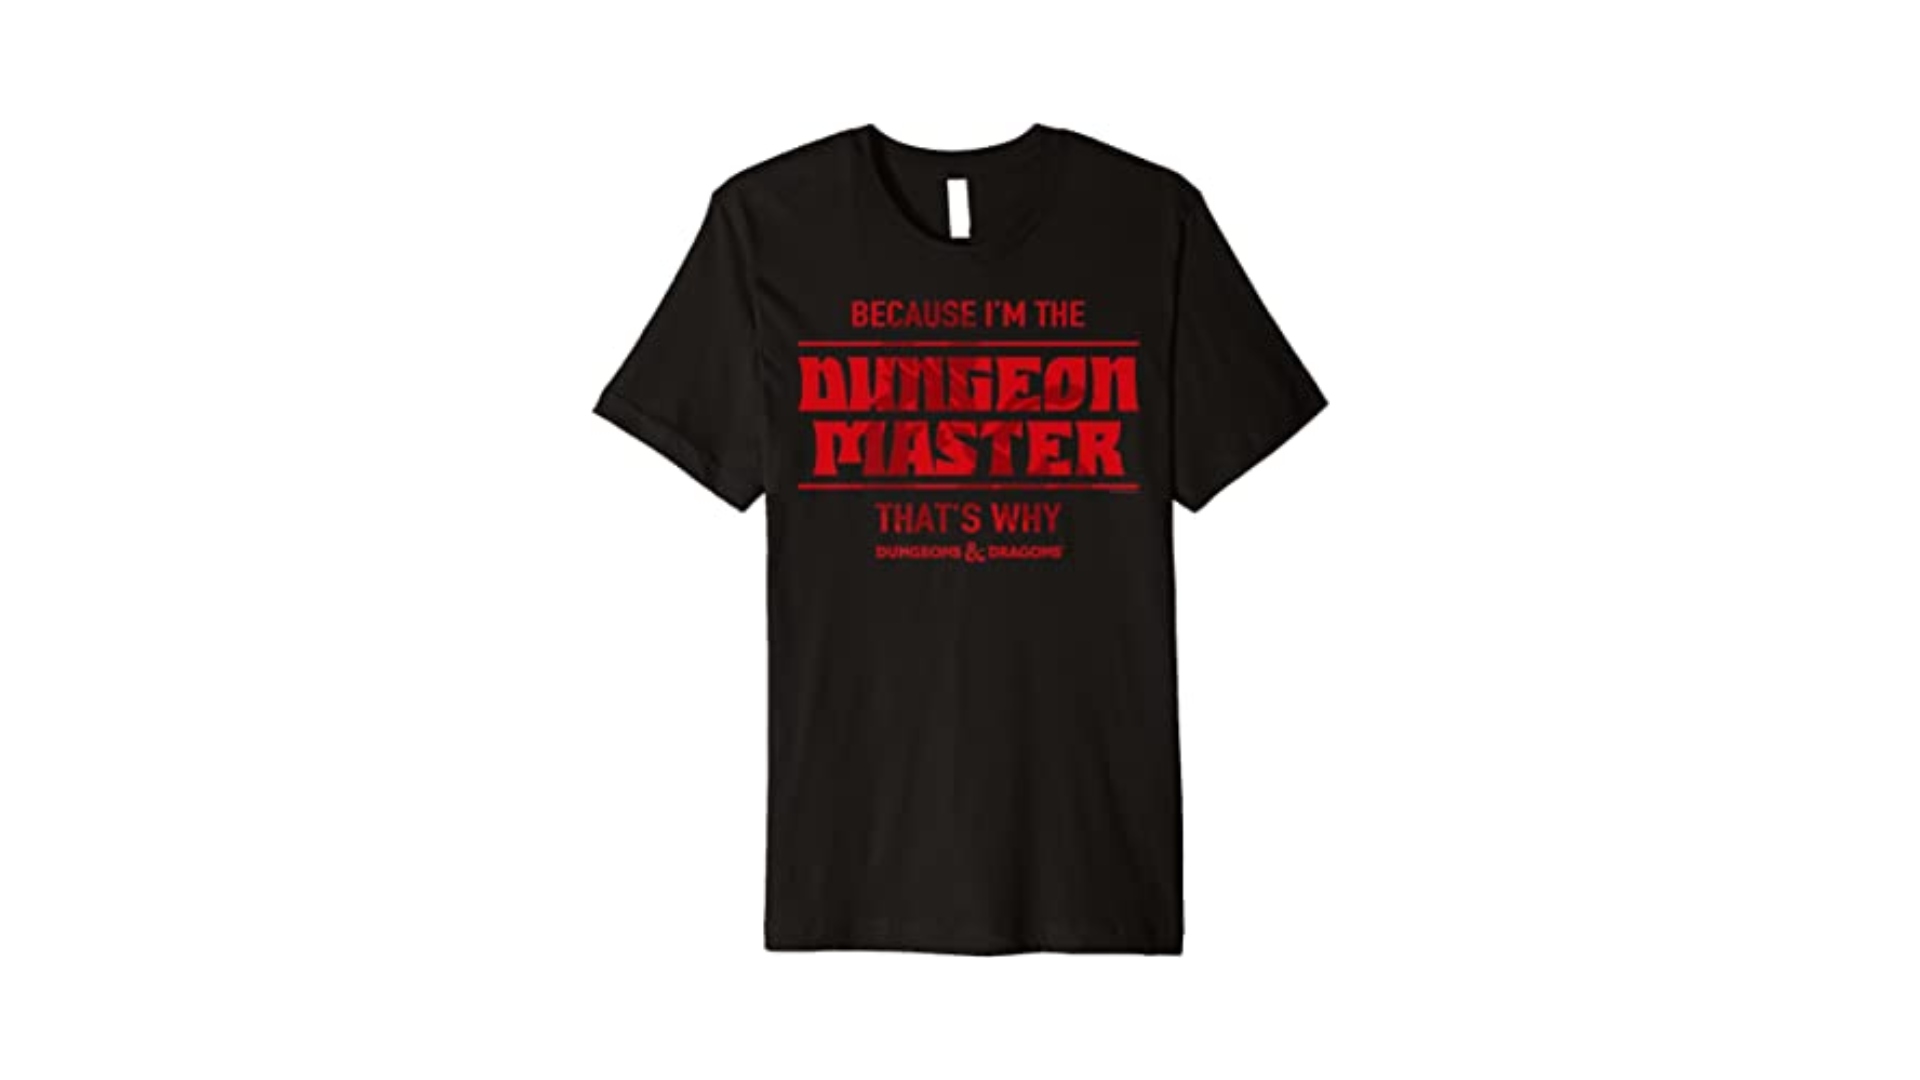 DnD gifts - A black T-shirt that says "Because I'm the Dungeon Master. That's why."